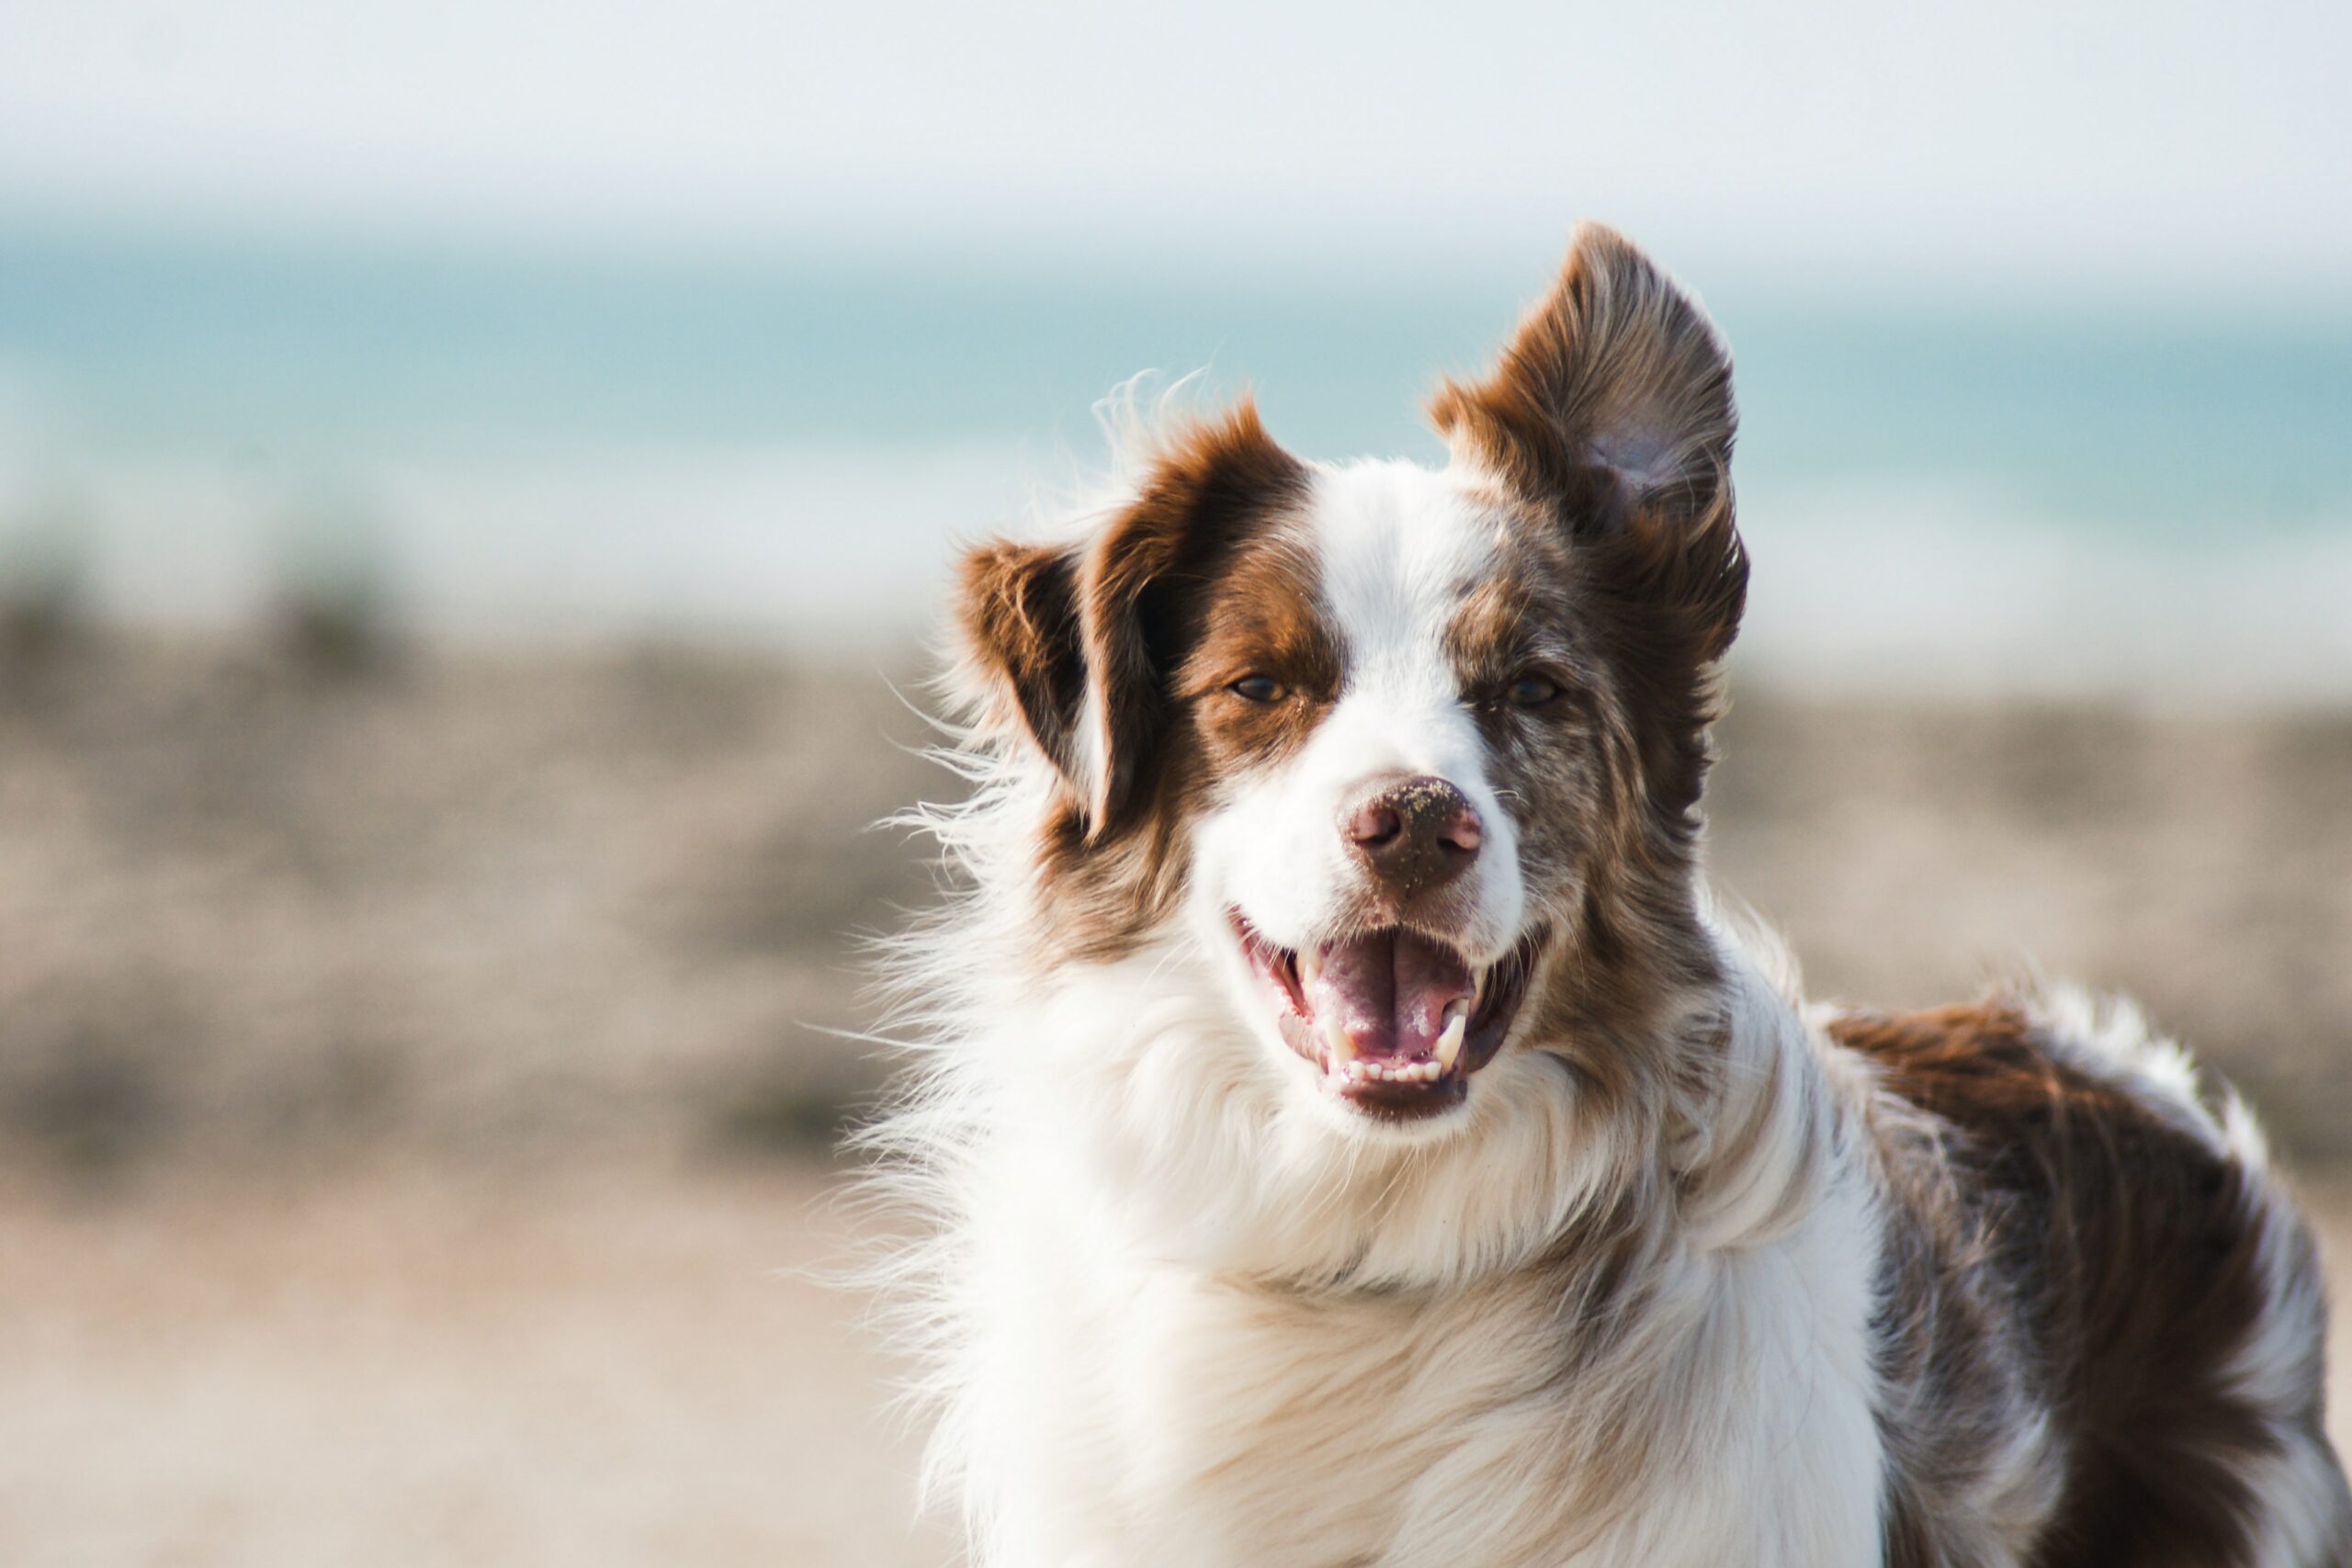 8 Tips for Planning a Dog-Friendly Vacation in Florida